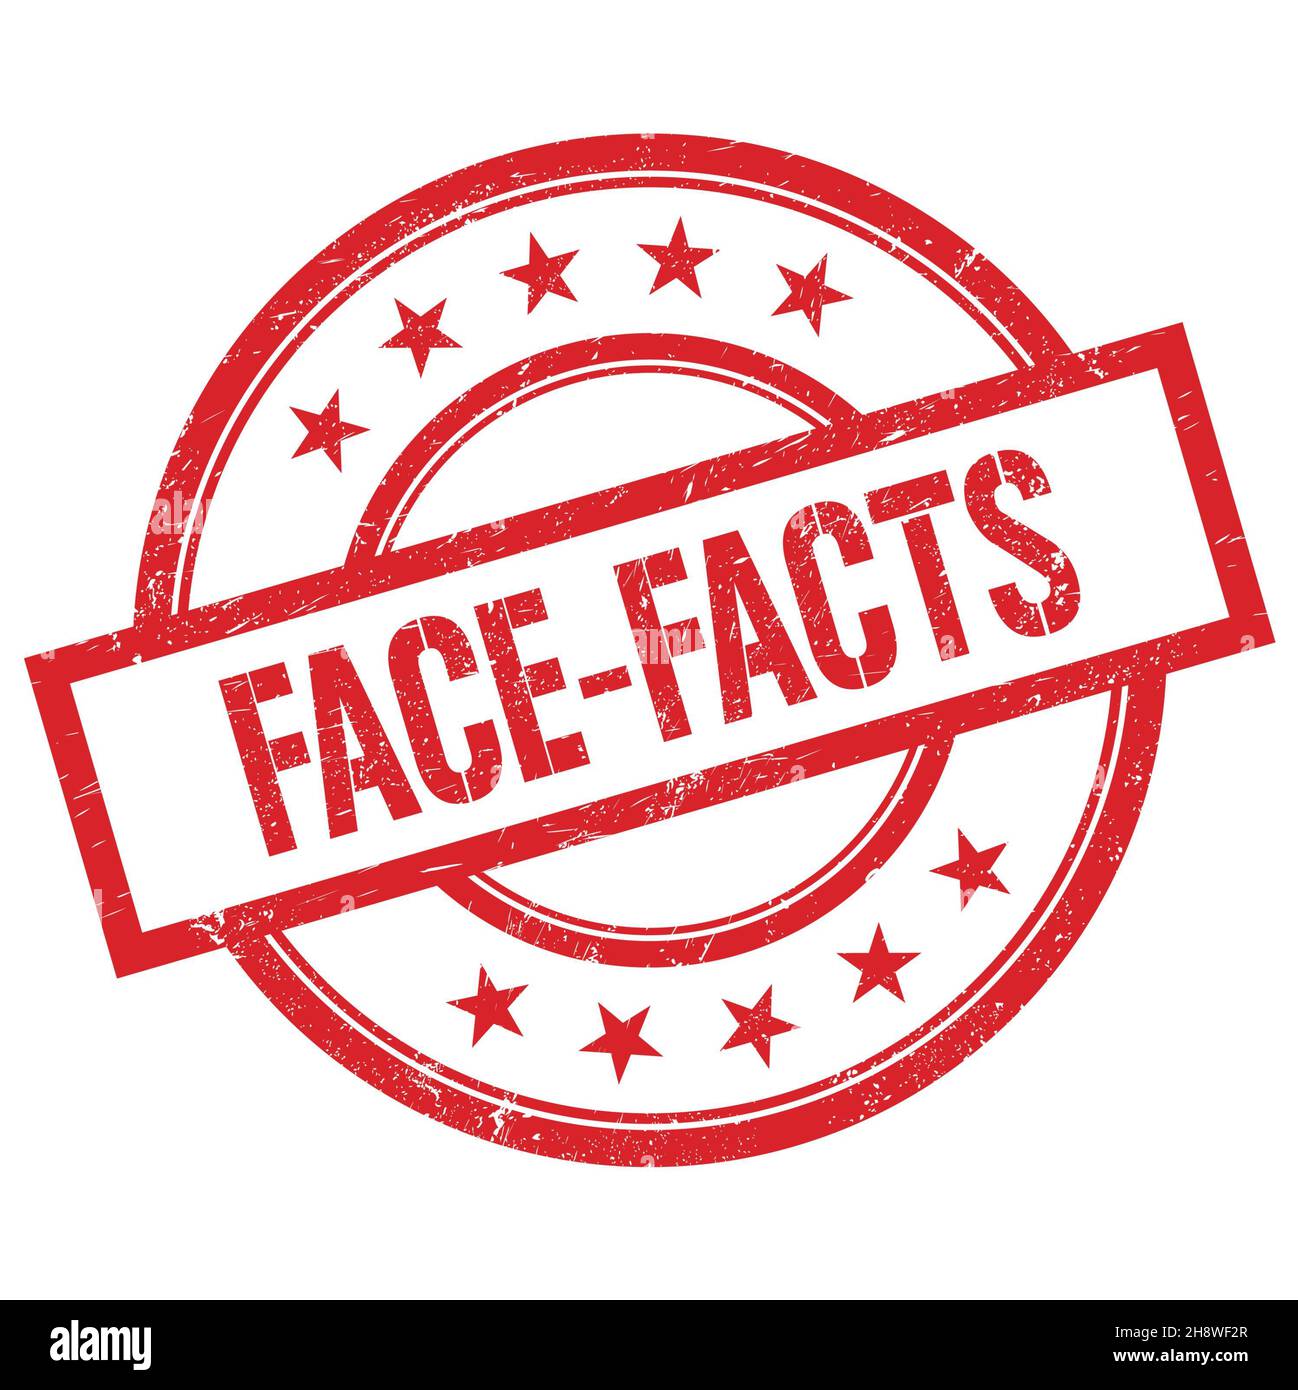 FACE-FACTS text written on red round vintage rubber stamp. Stock Photo